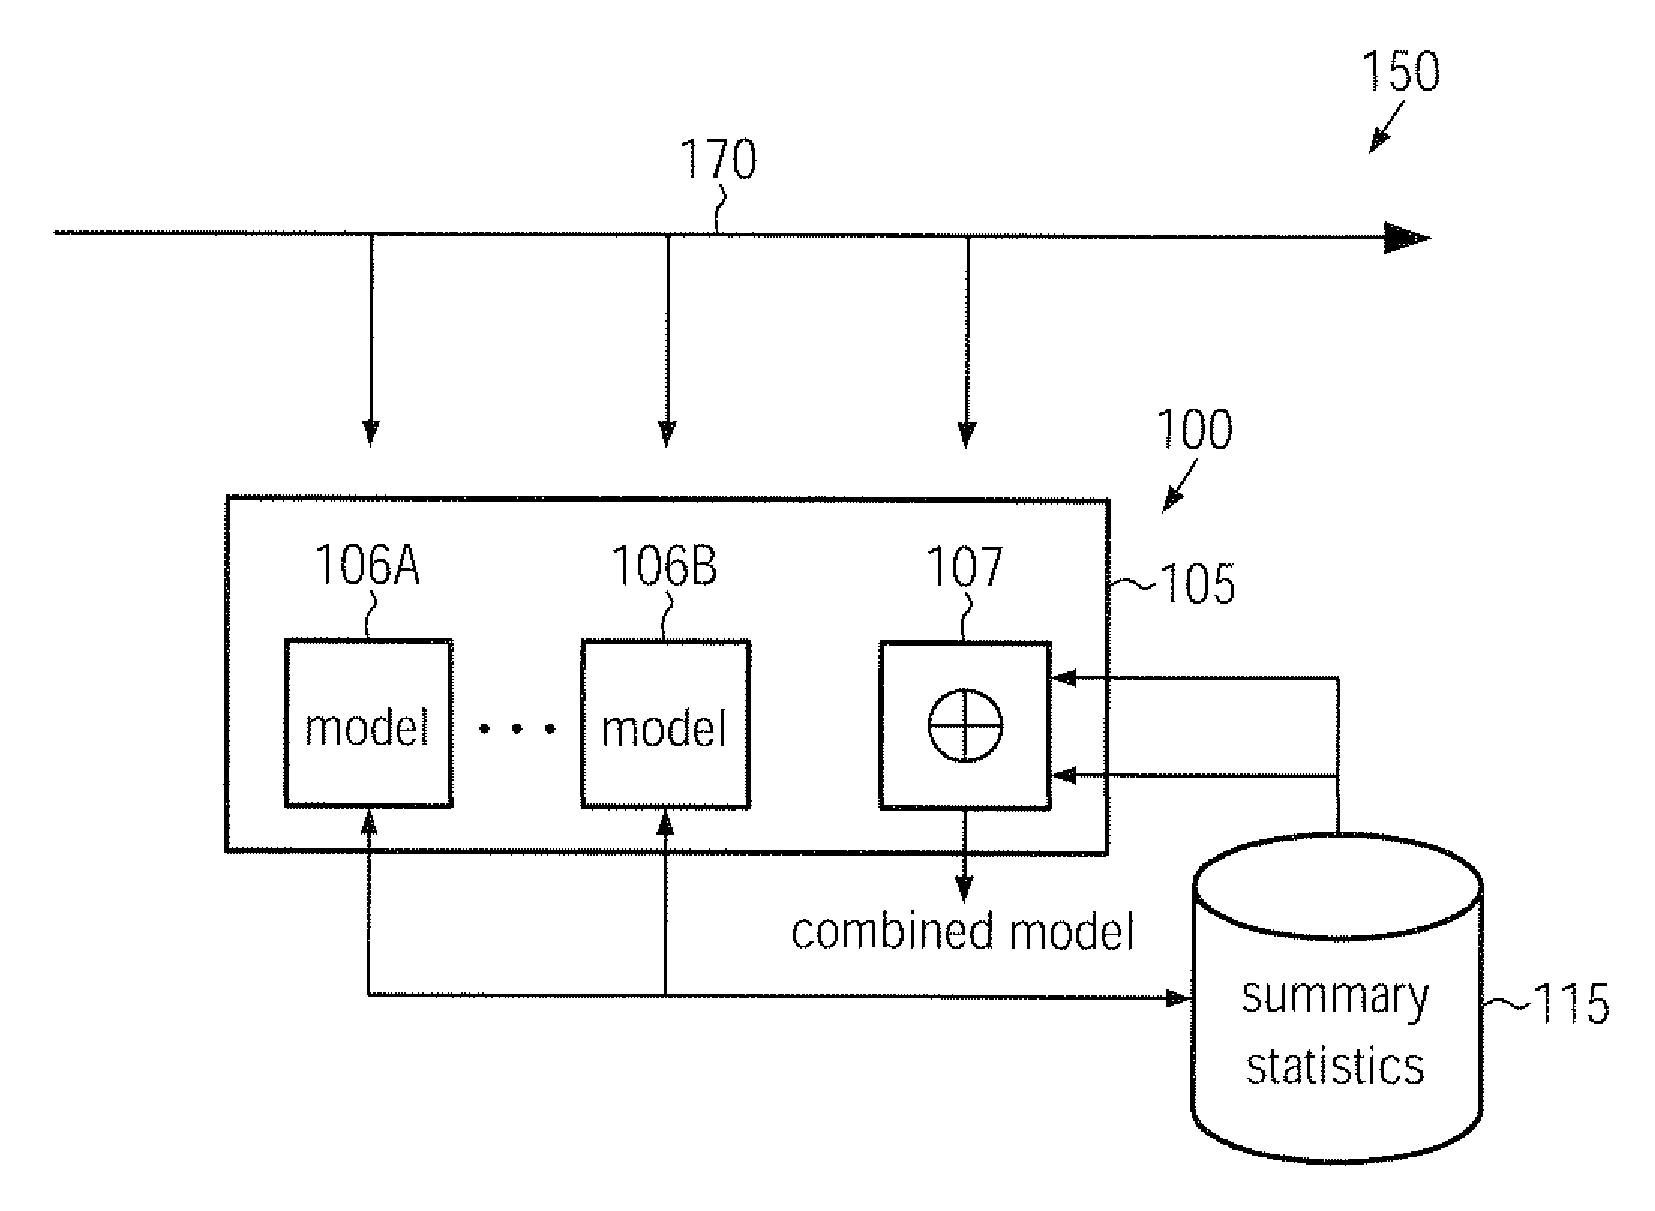 Method and system for semiconductor process control and monitoring by using pca models of reduced size